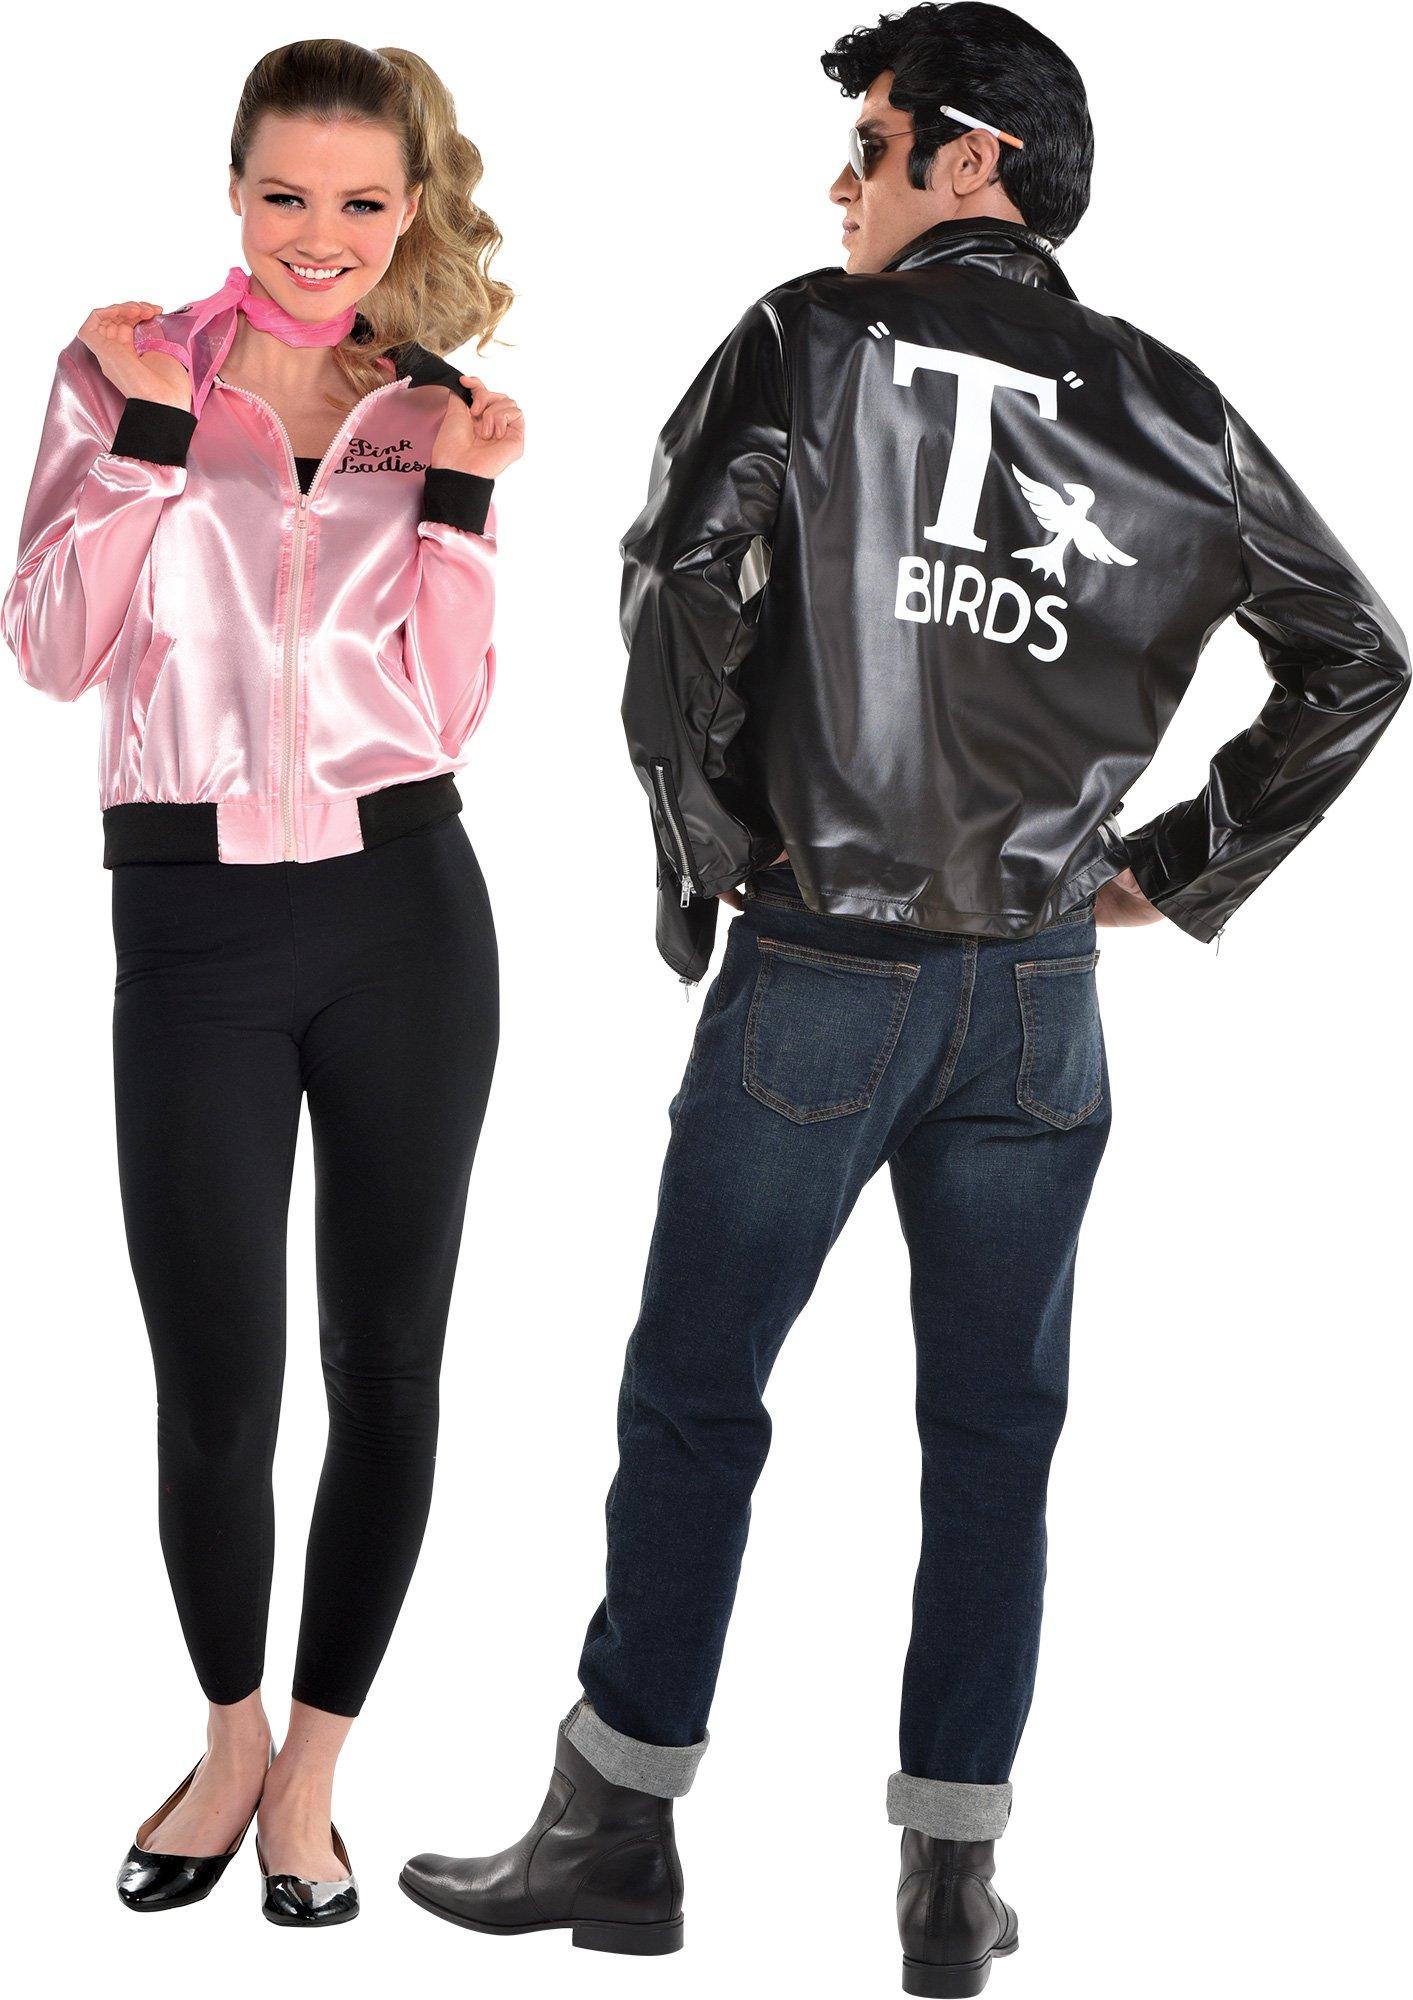 Danny & Sandy Couples Costumes - Grease | Party City